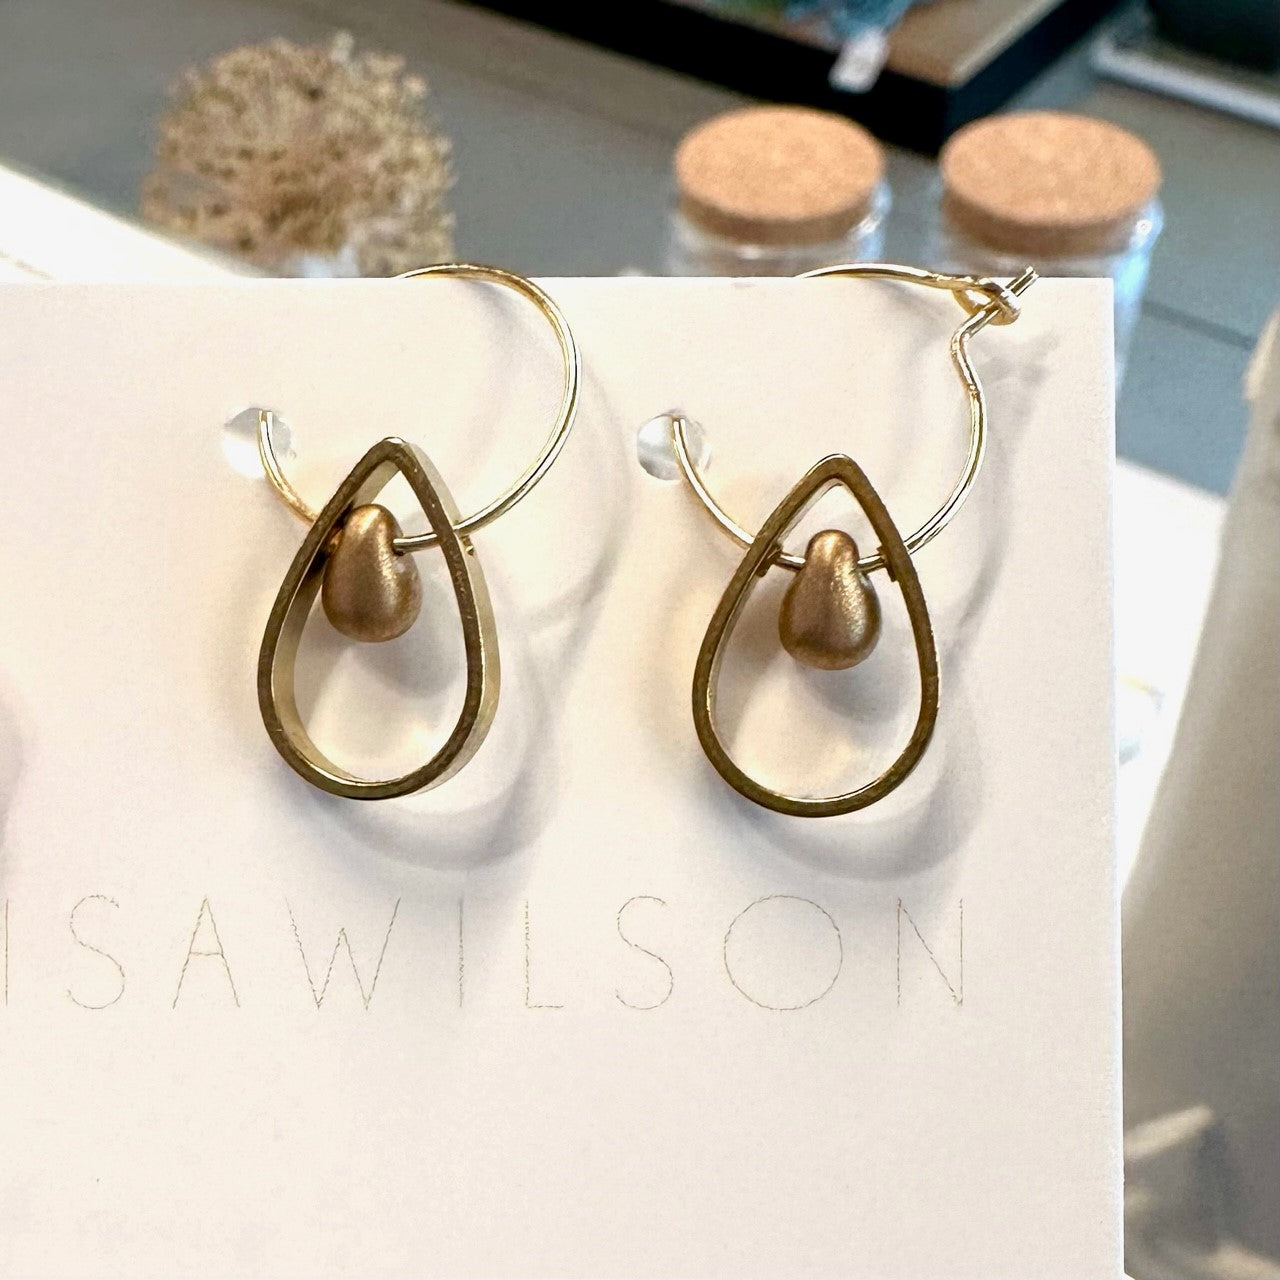 Small Brass Hoop Earrings with Teardrop Cutout and Droplet Bead